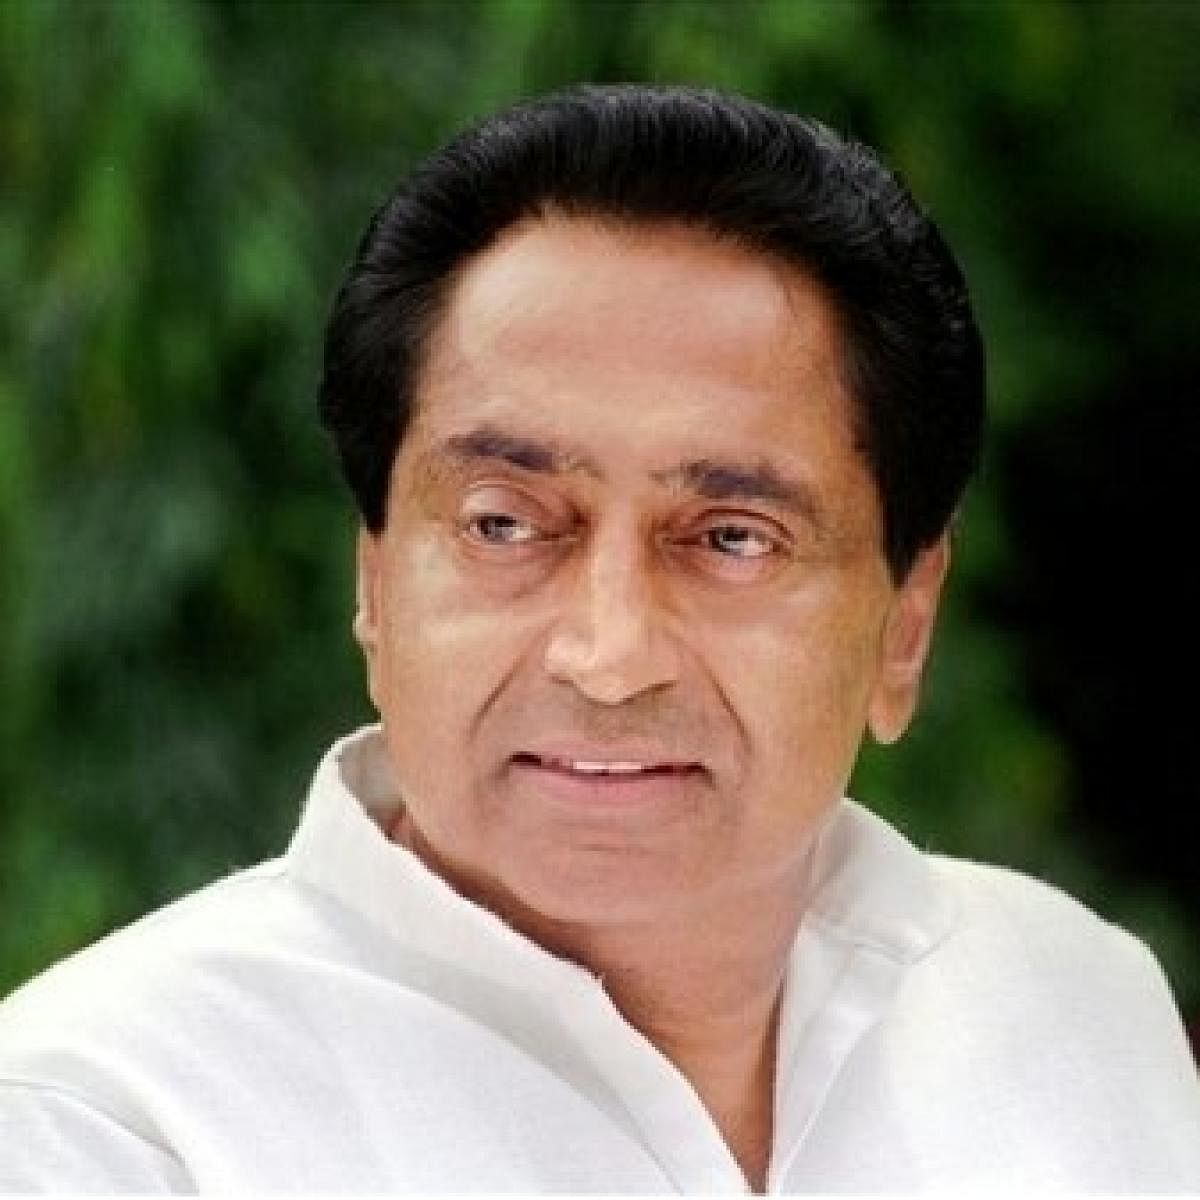 At present, Chief Minister Kamal Nath is also the president of the Madhya Pradesh Congress Committee (DH Photo)